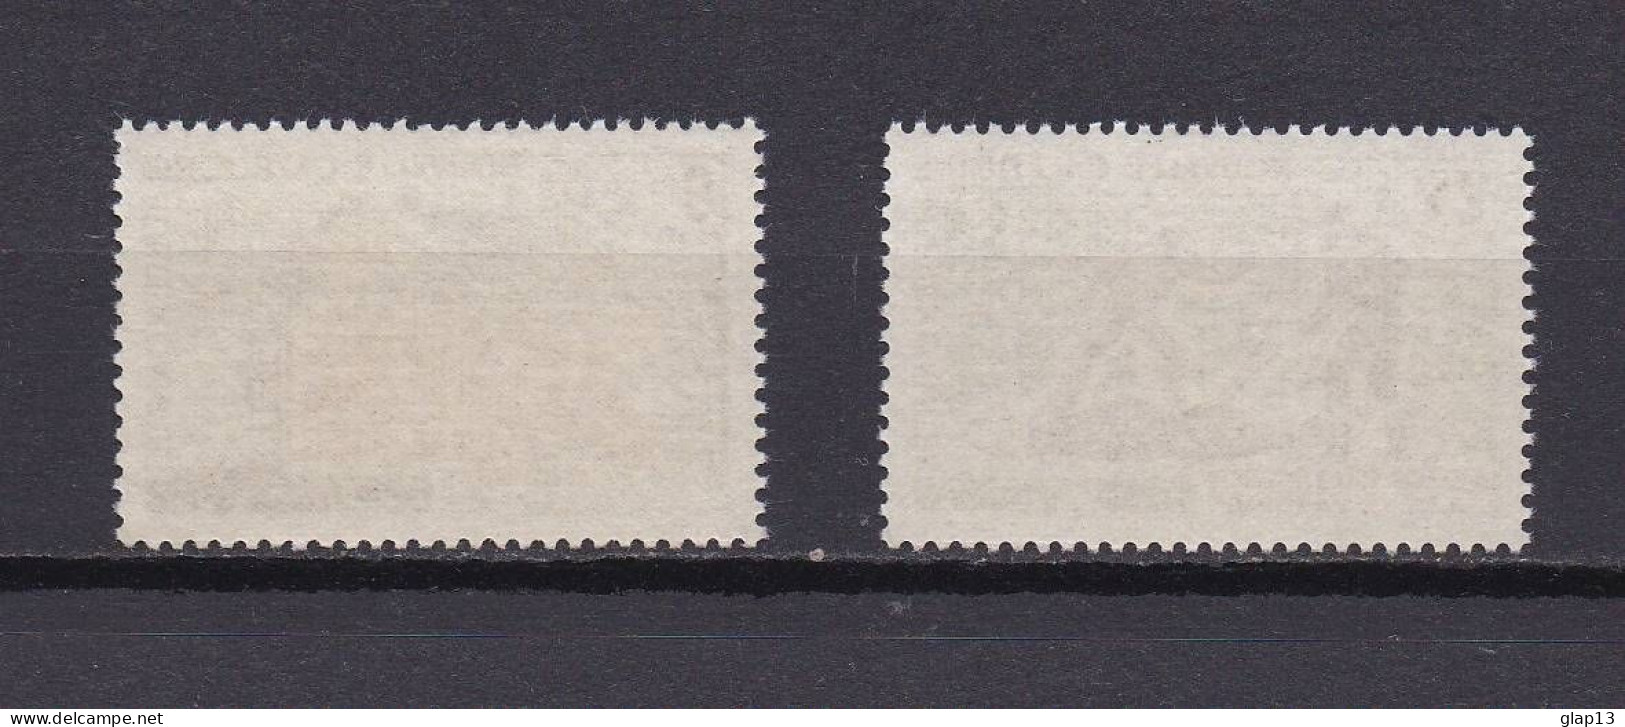 NOUVELLE-CALEDONIE 1969 TIMBRE N°356/57 NEUF** ELEVAGE - Neufs